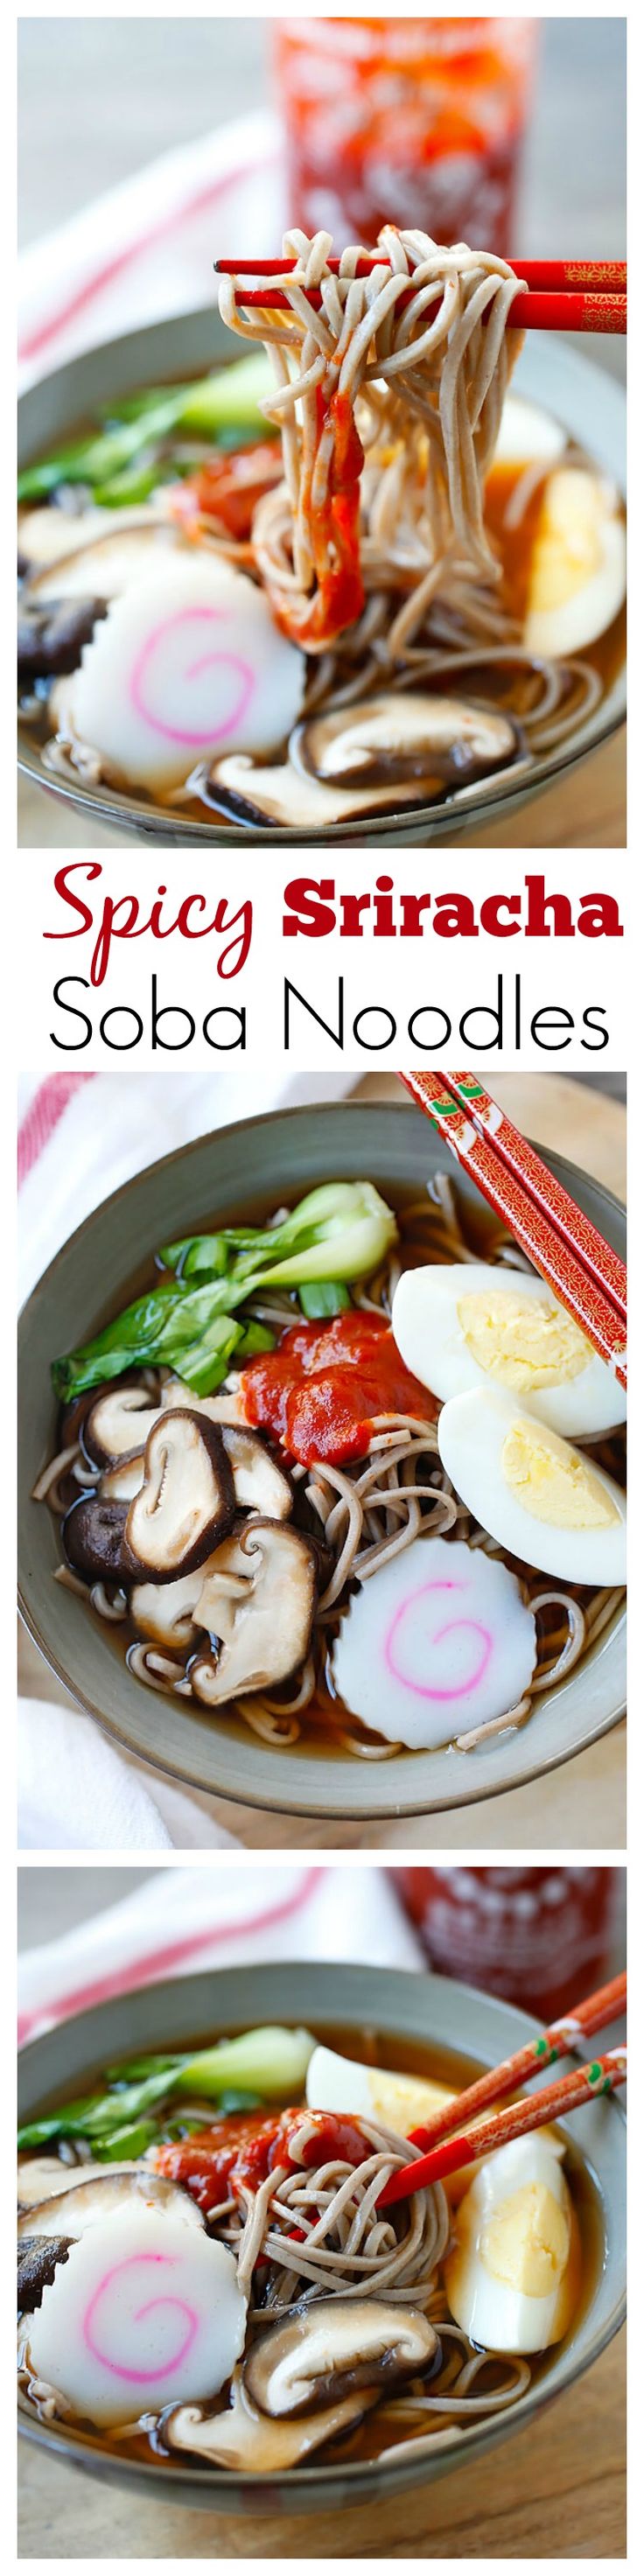 Spicy Sriracha Soba Noodle Soup – the easiest & most delicious noodle soup ever, with spicy Sriracha added to the broth and takes only 15 mins | rasamalaysia.com